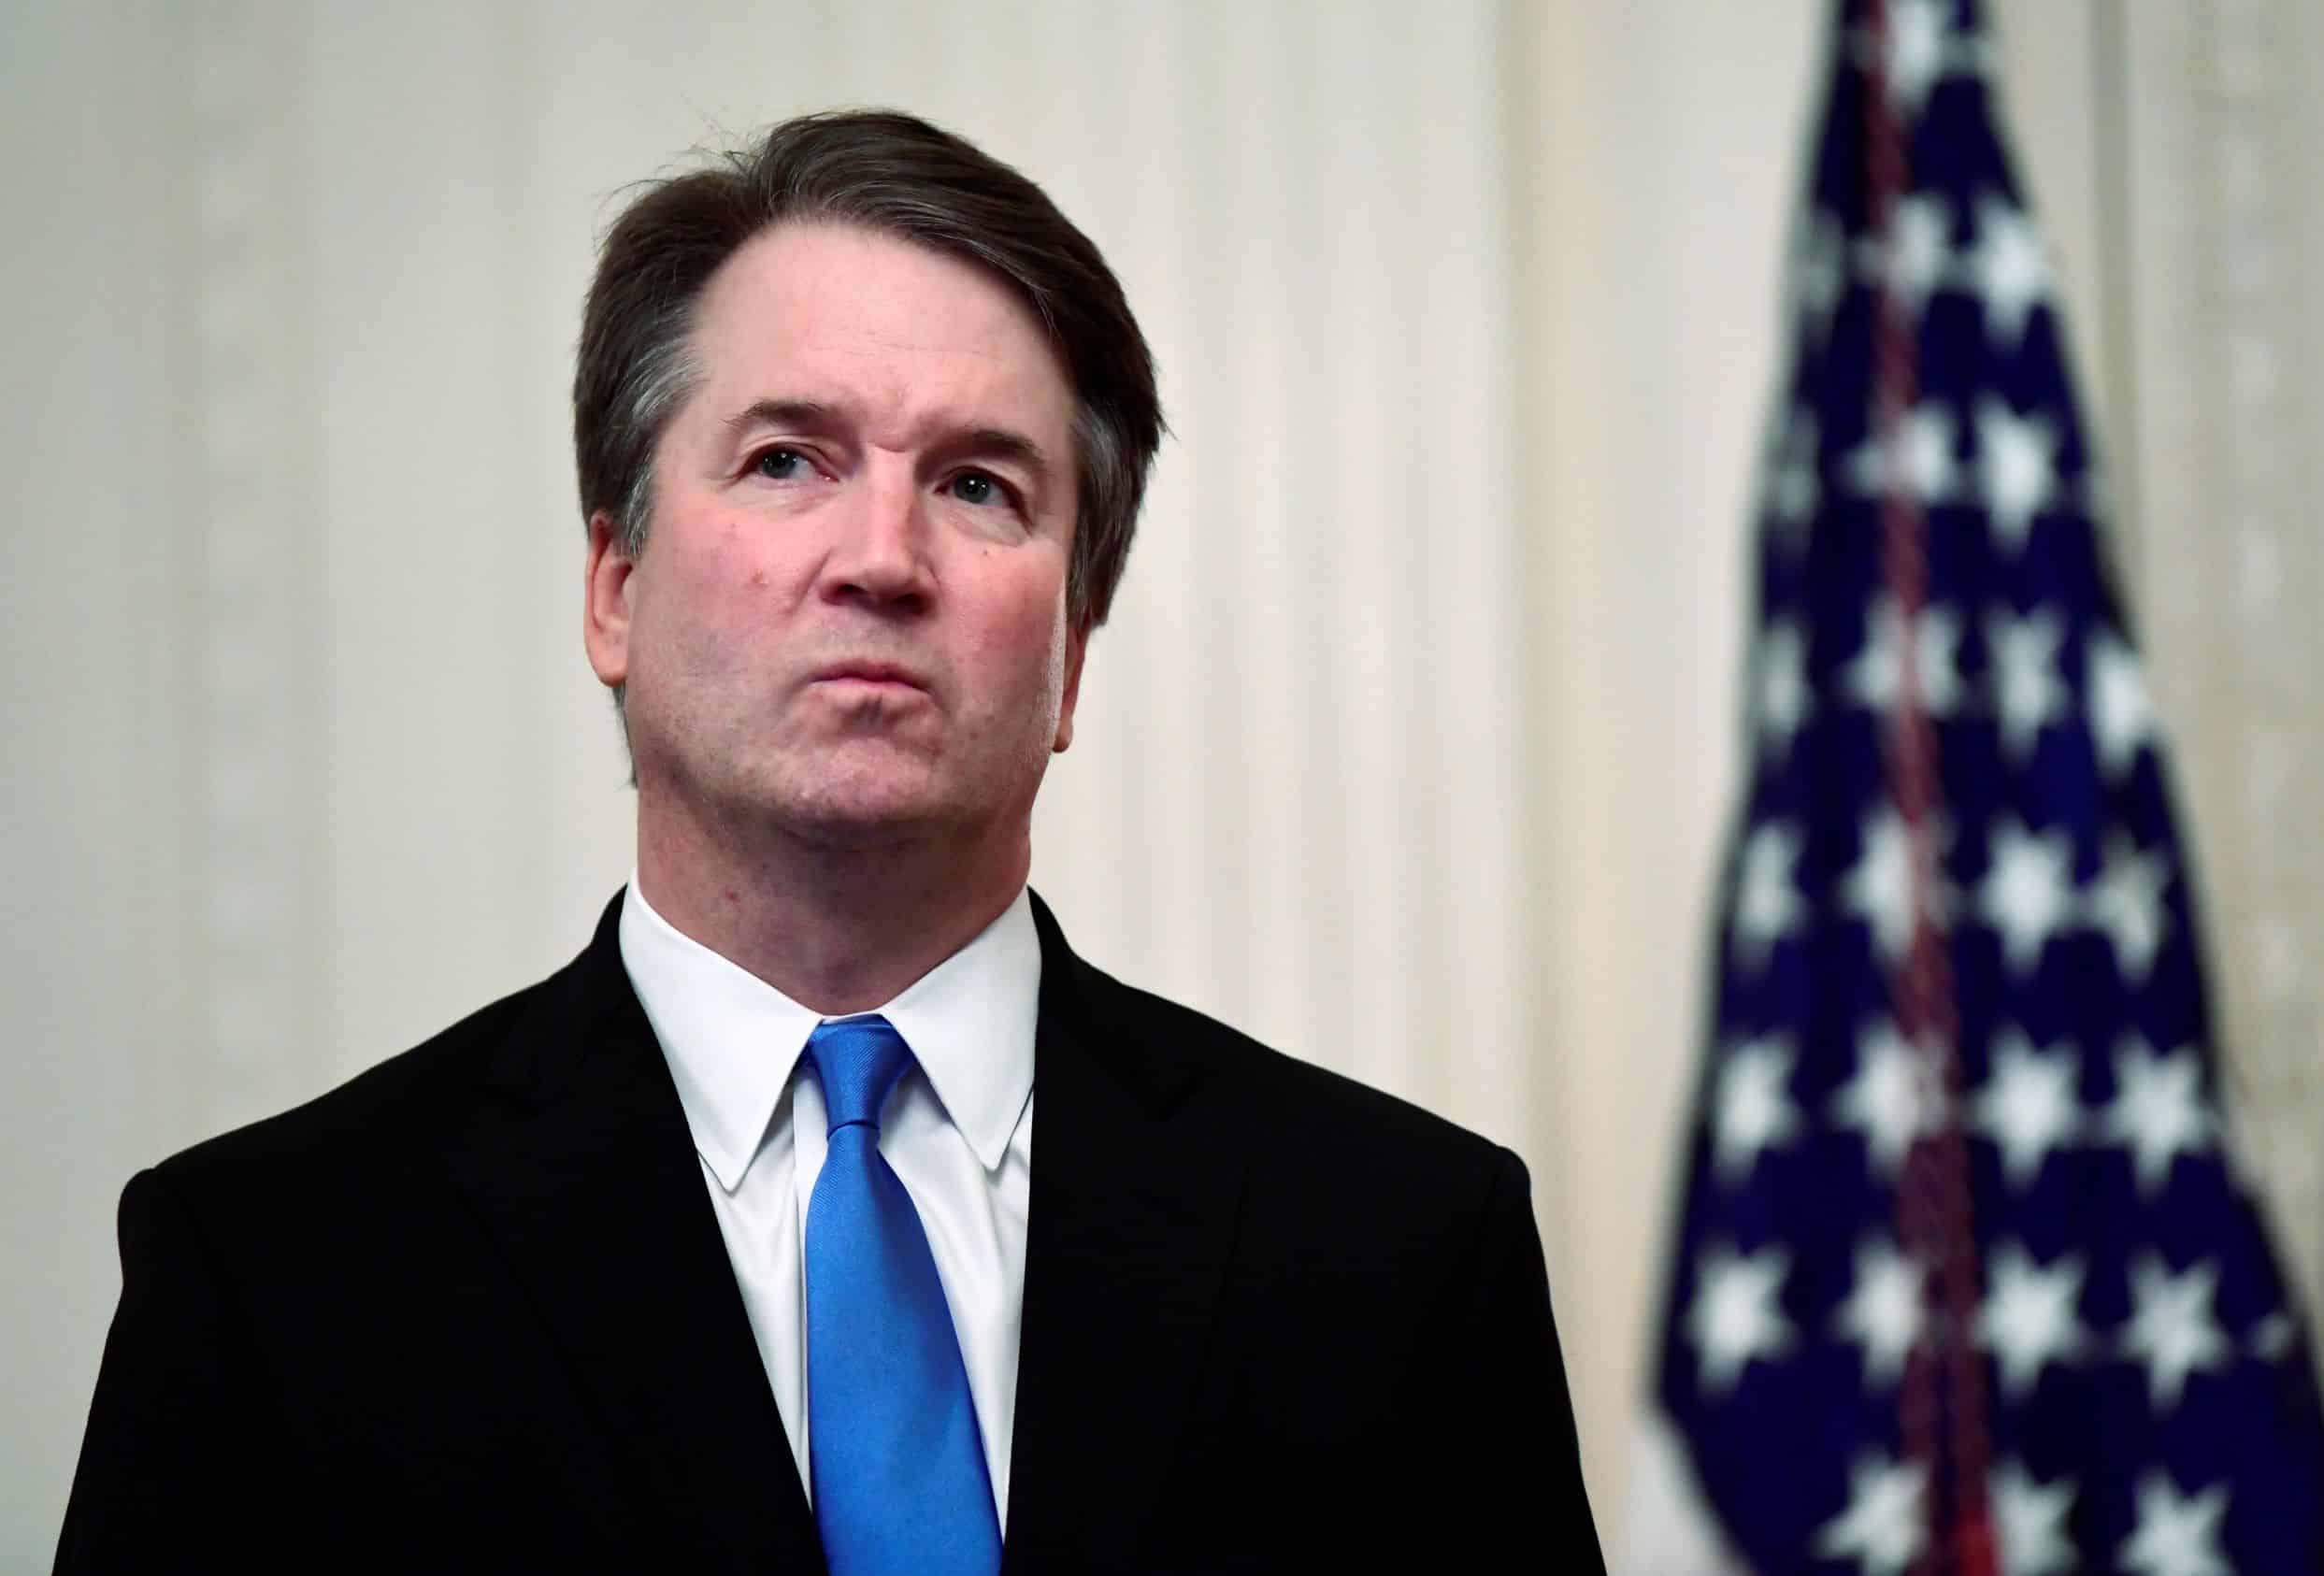 Justice Kavanaugh Tests Positive for COVID on Eve of Barrett Investiture